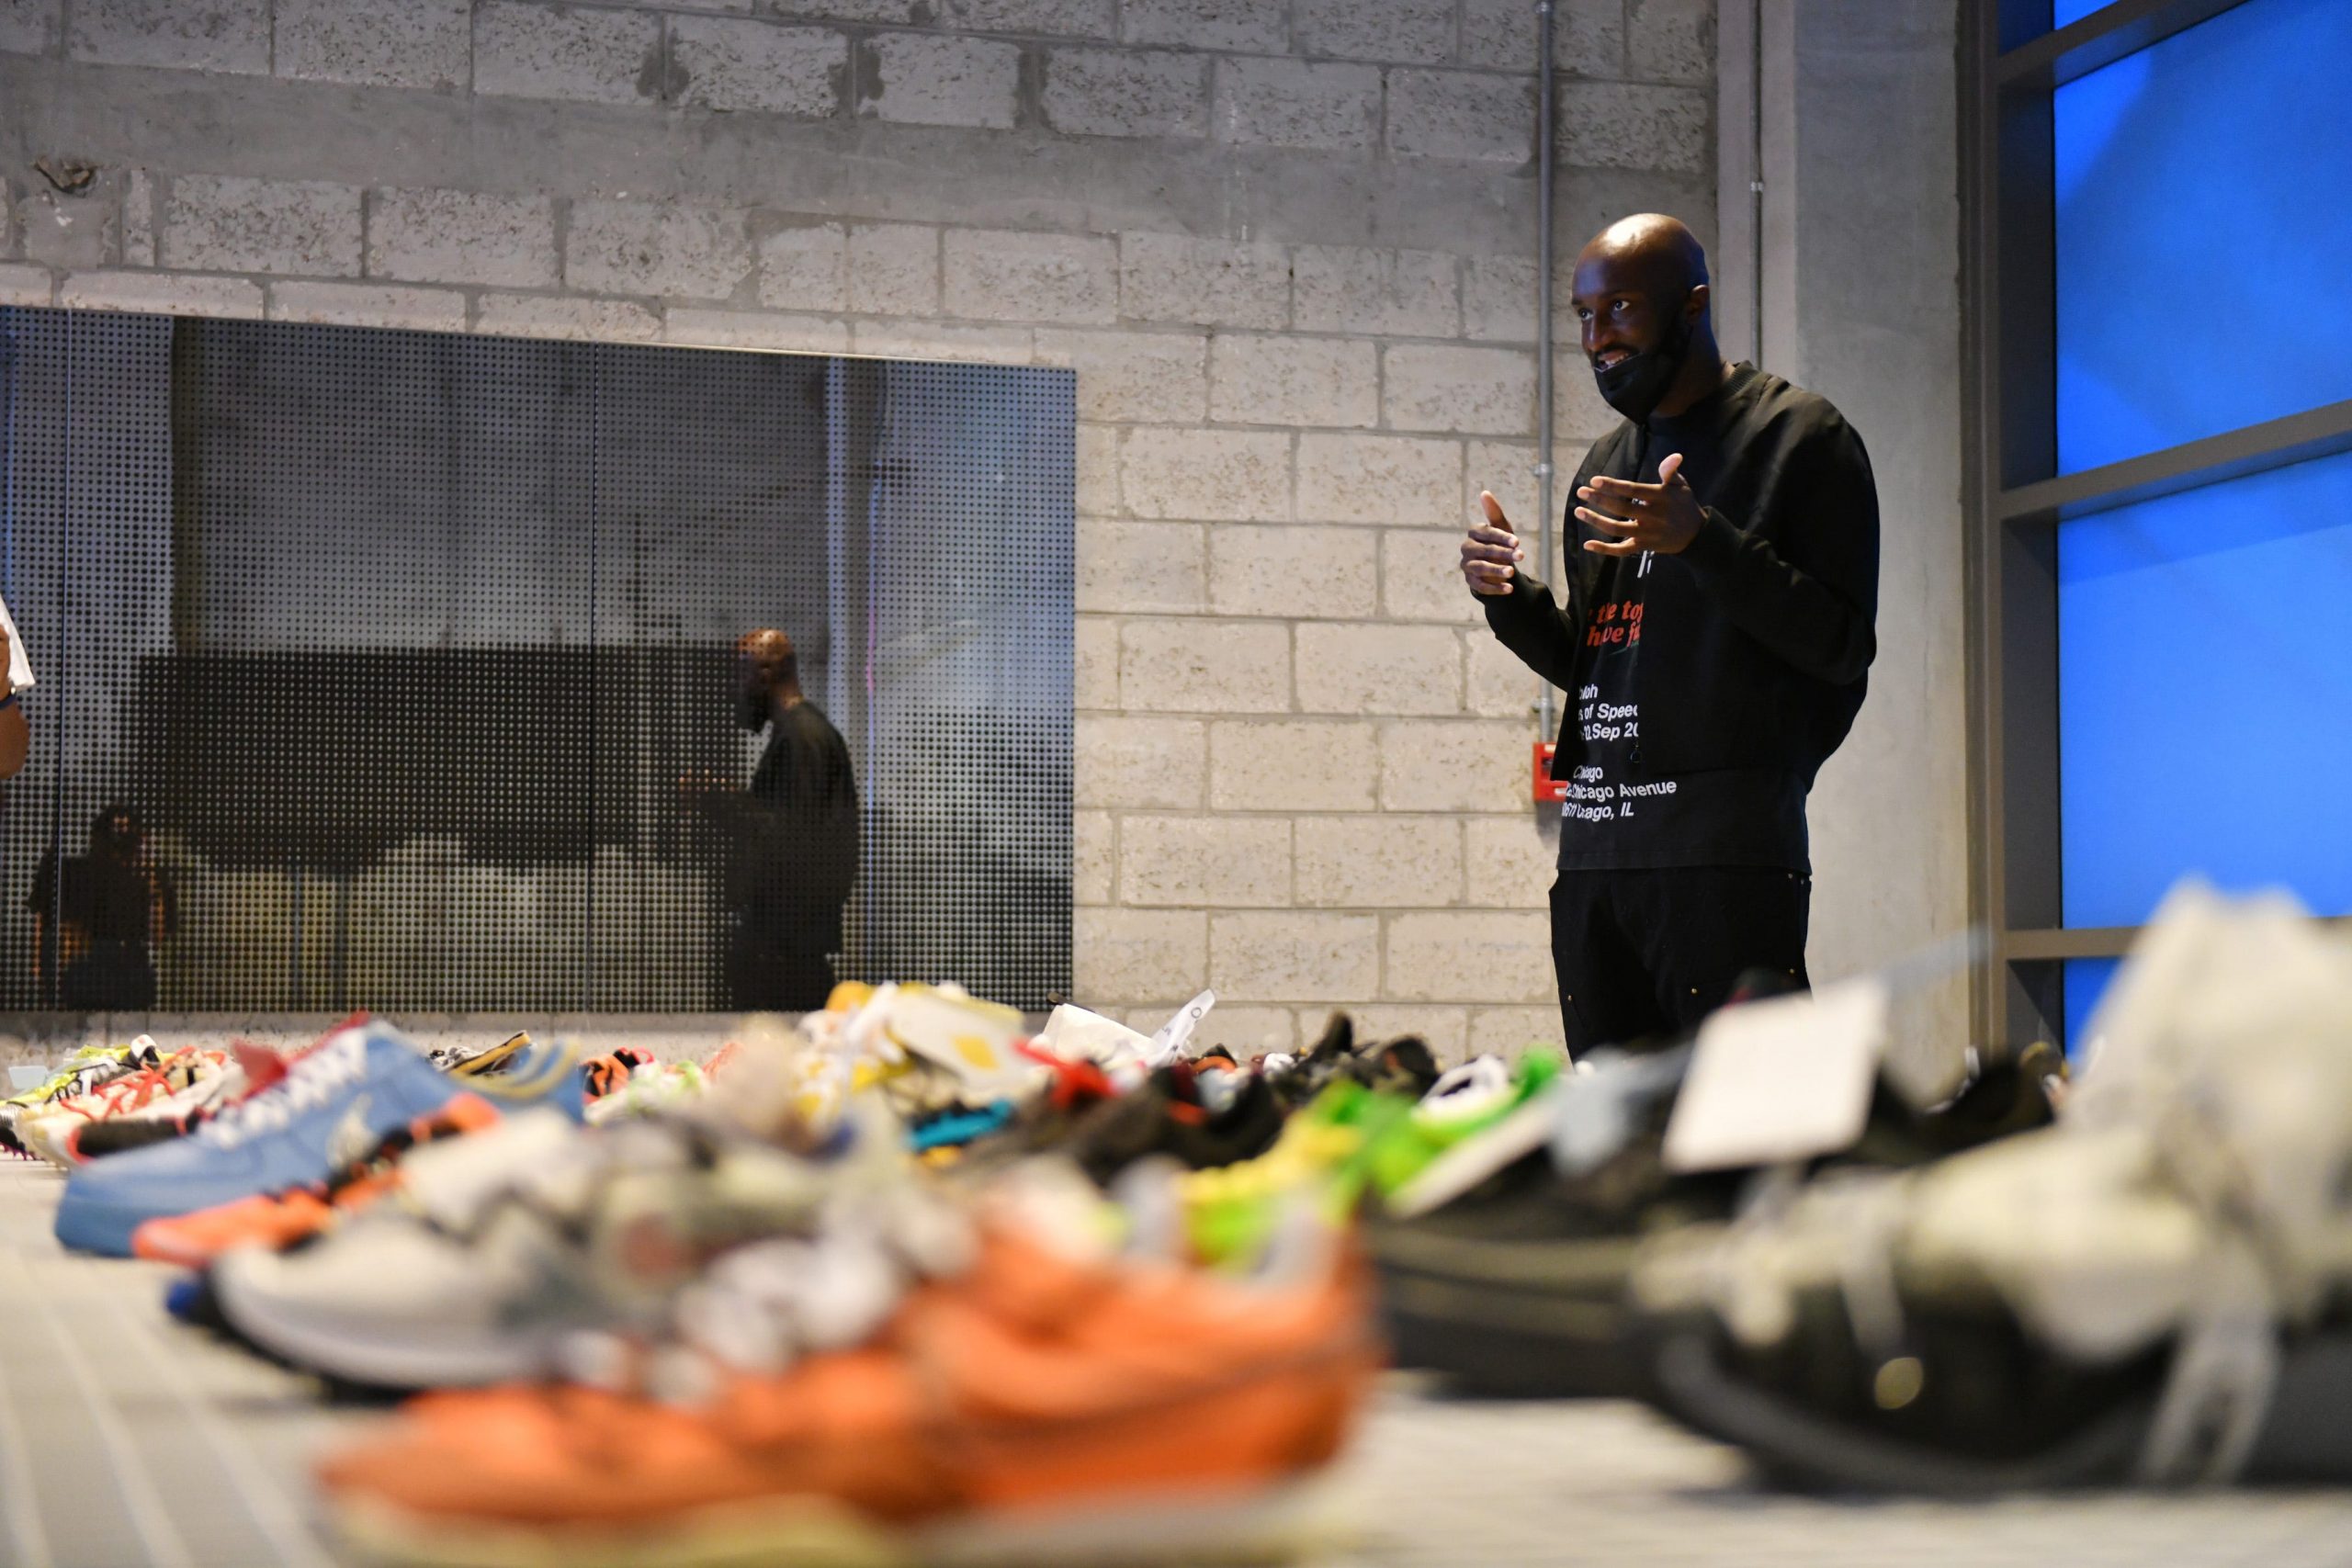 A man addresses an audience with a display of sneakers seen in the foreground.